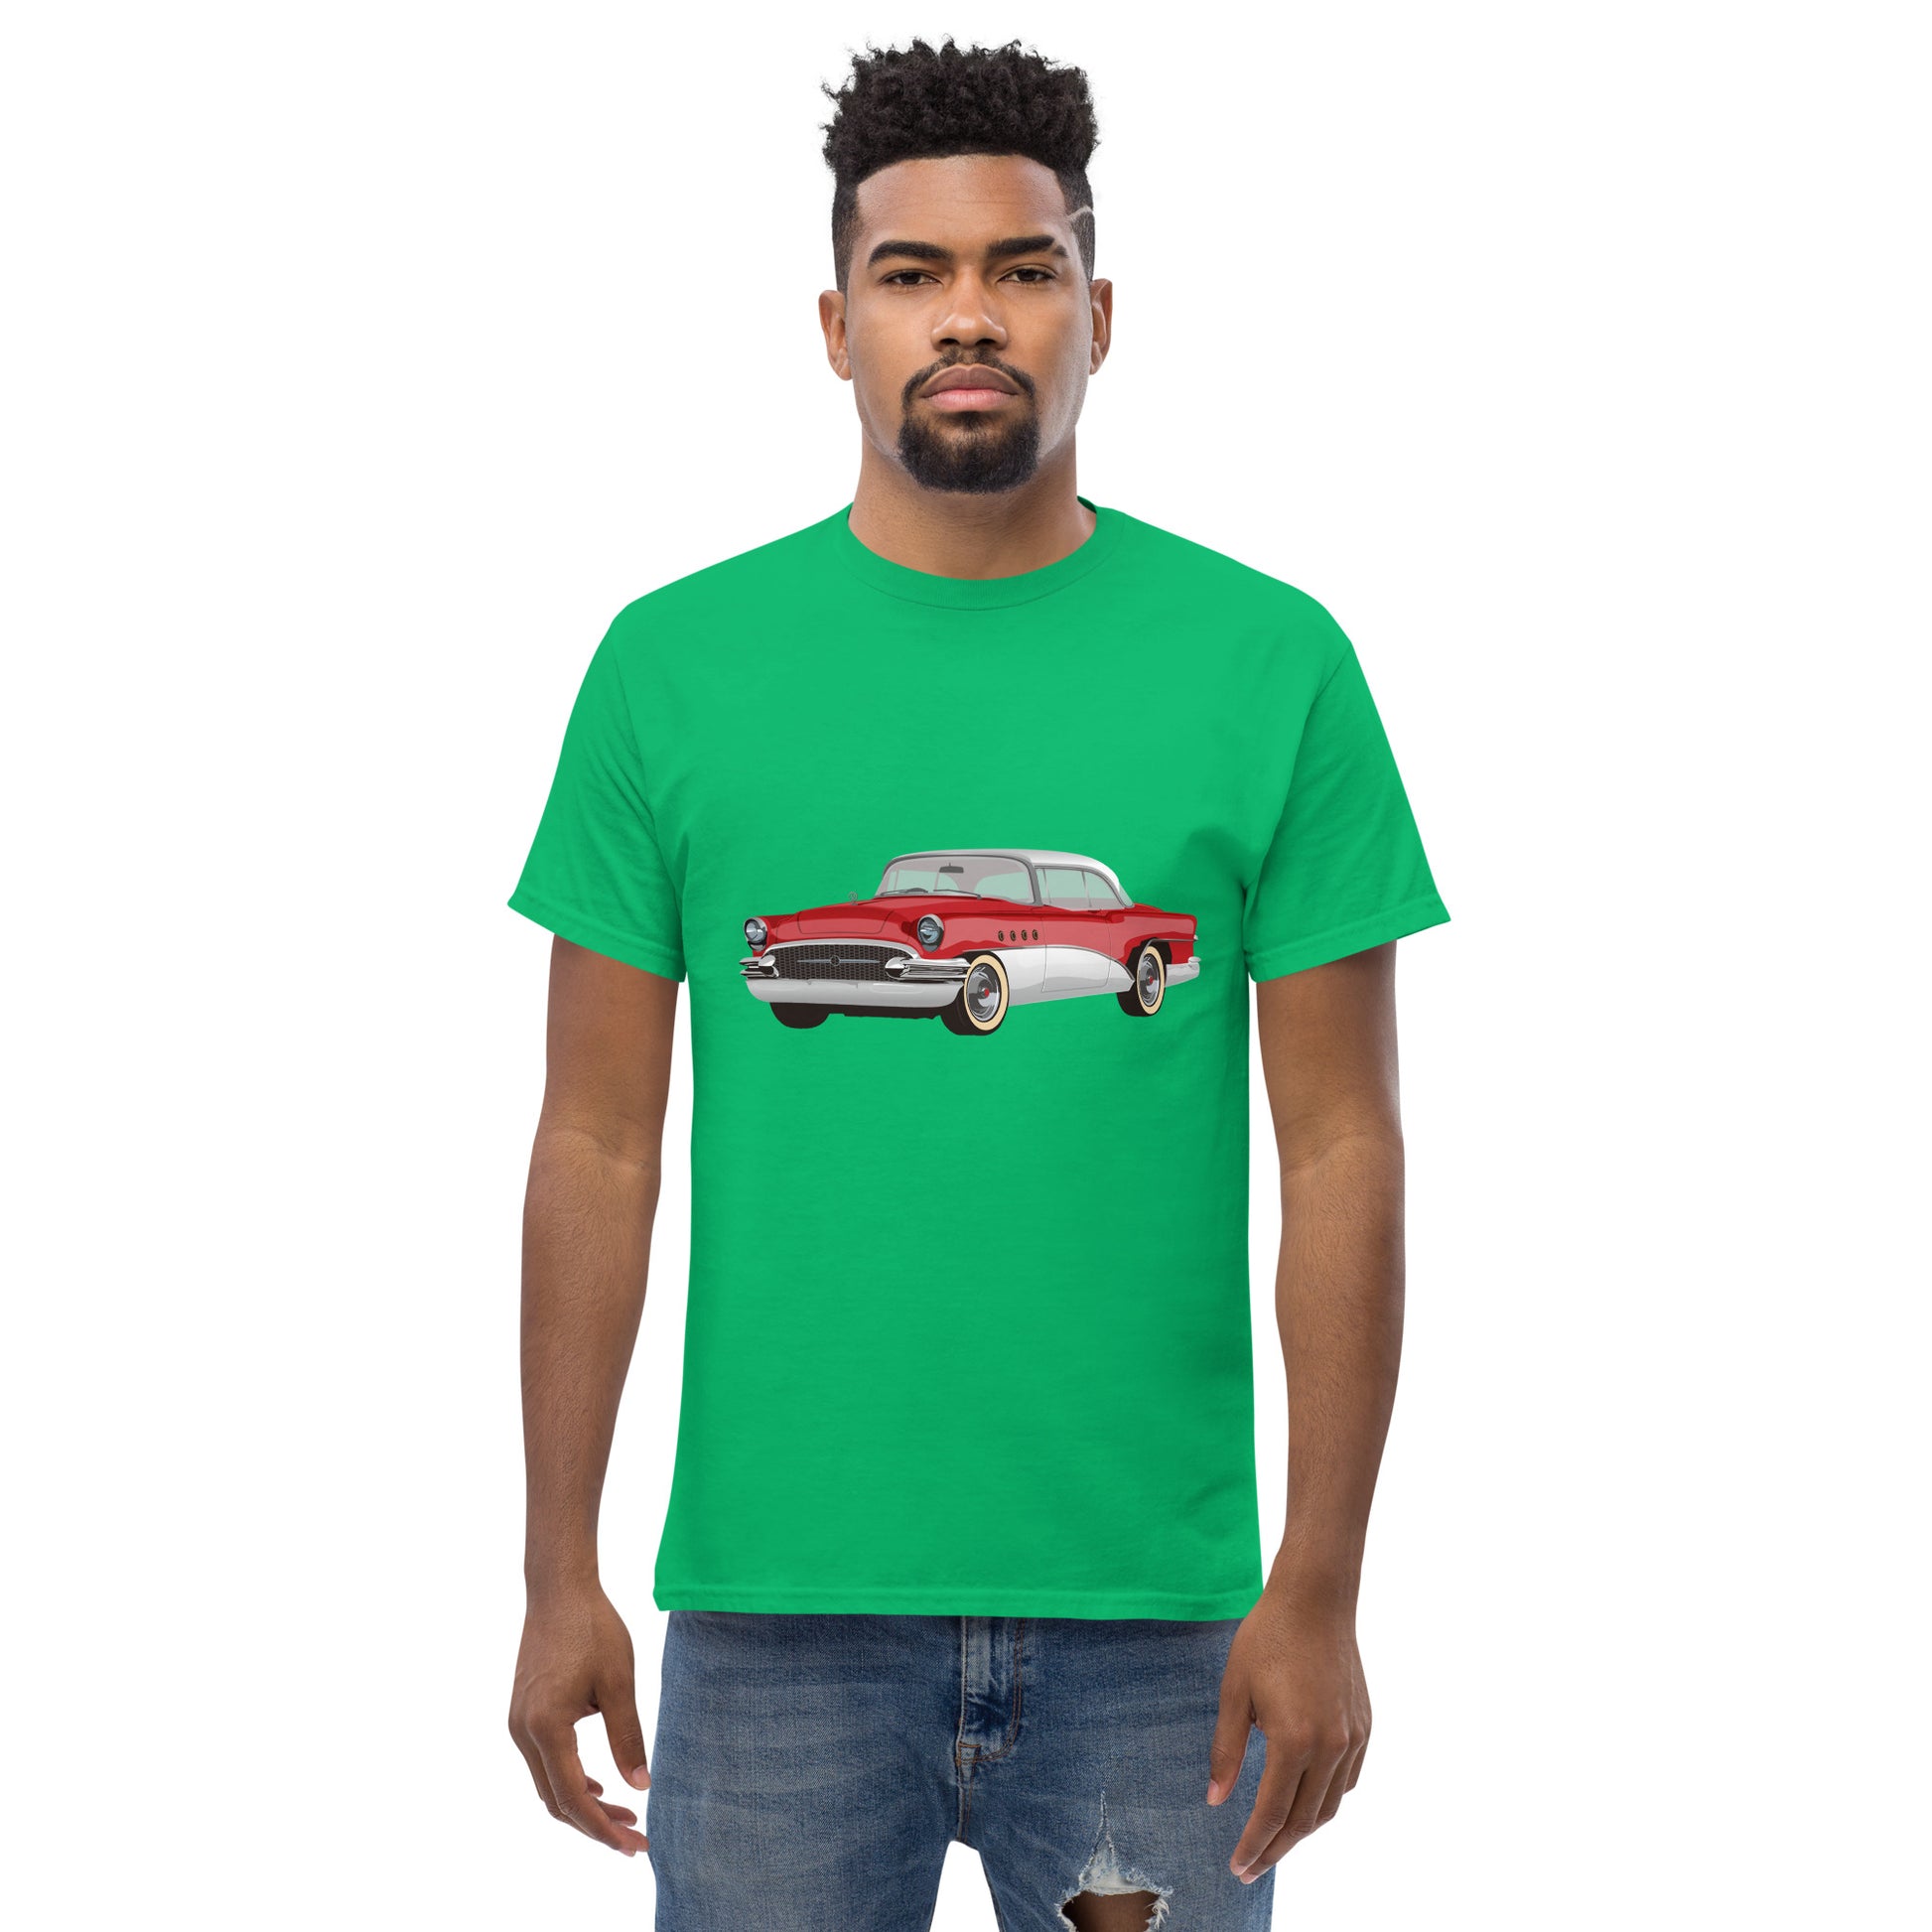 Men with Irish green t-shirt with red Chevrolet 